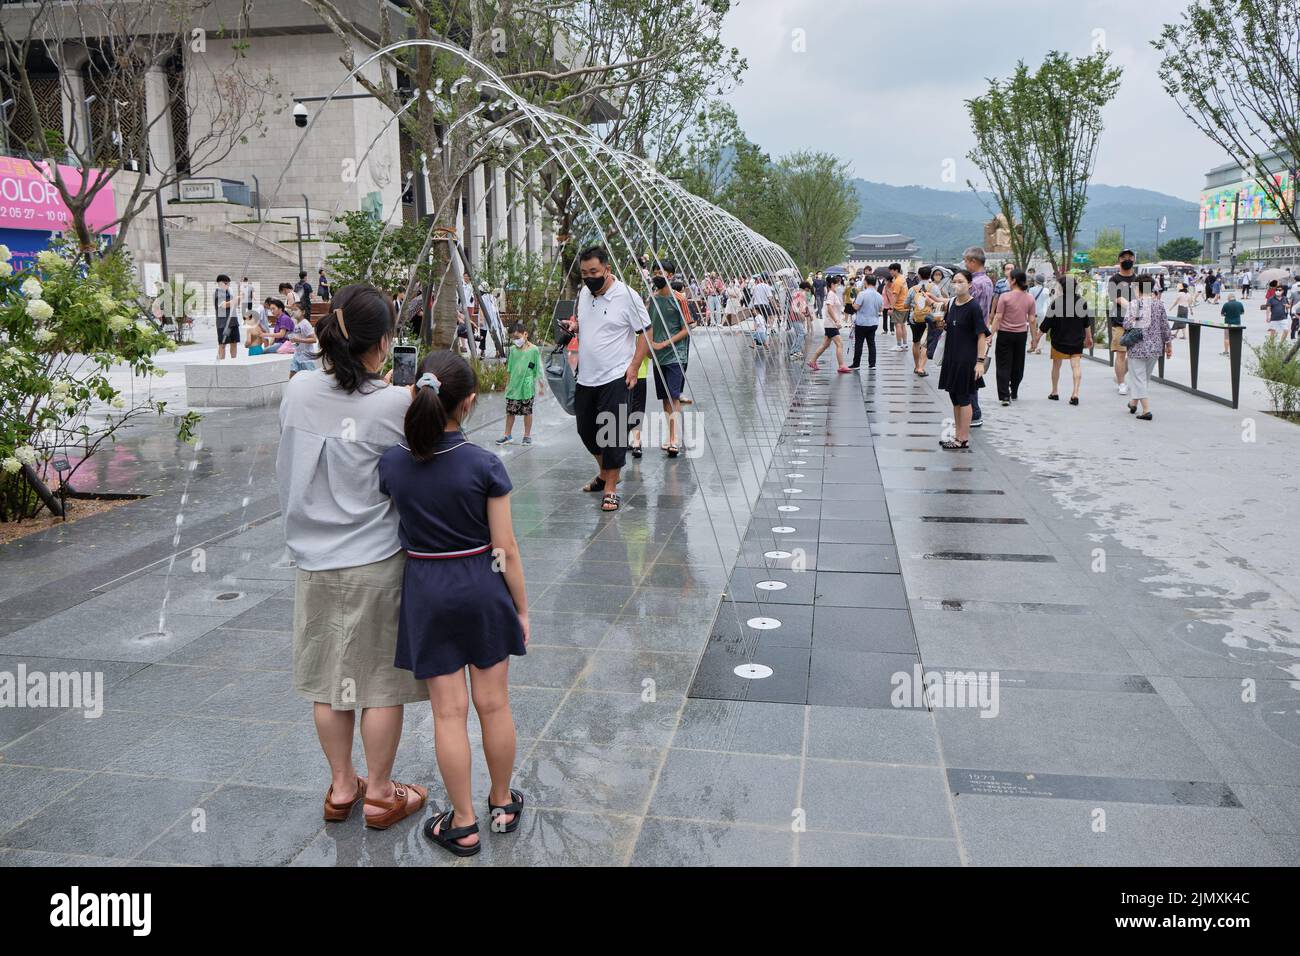 People visit newly reconstructed Gwanghwamun Square in central Seoul, South Korea on 7 August 2022 Stock Photo